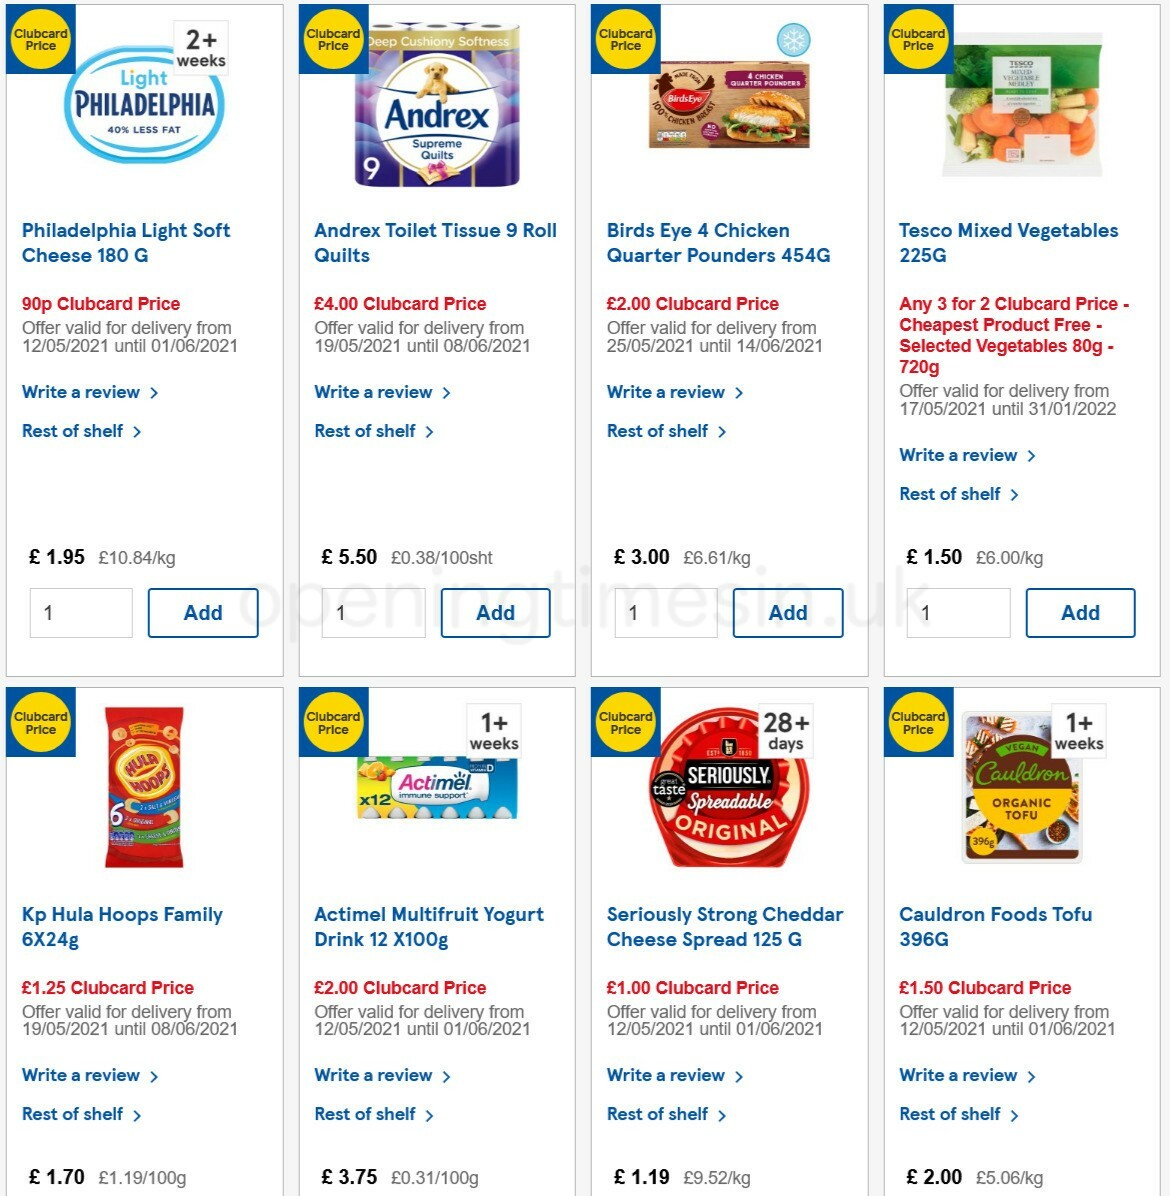 TESCO Offers from 26 May